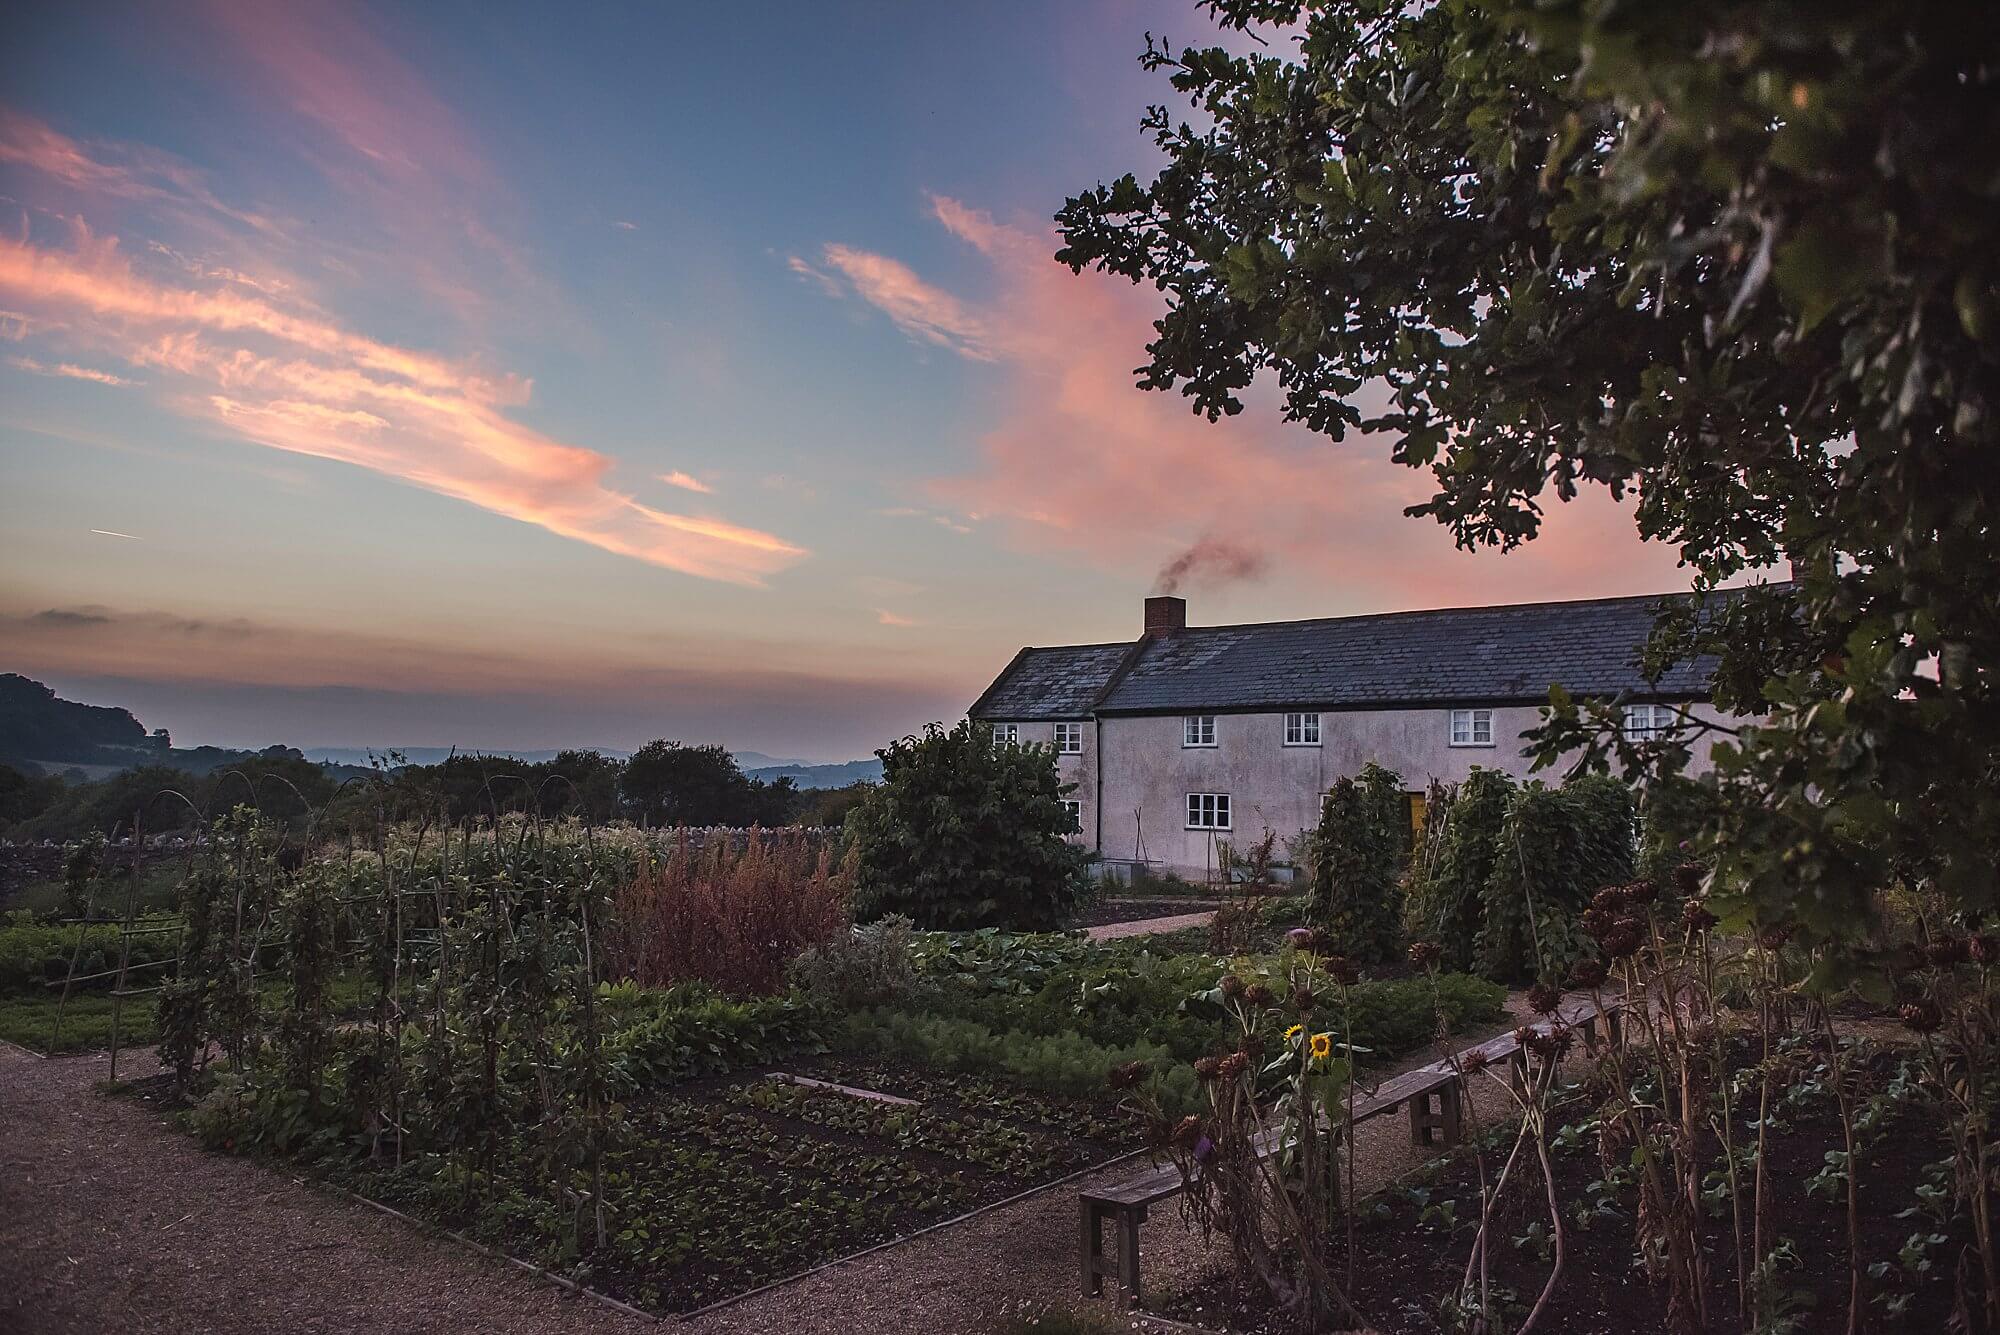 evening and sunset over River Cottage Park Farm gardens near Axminster